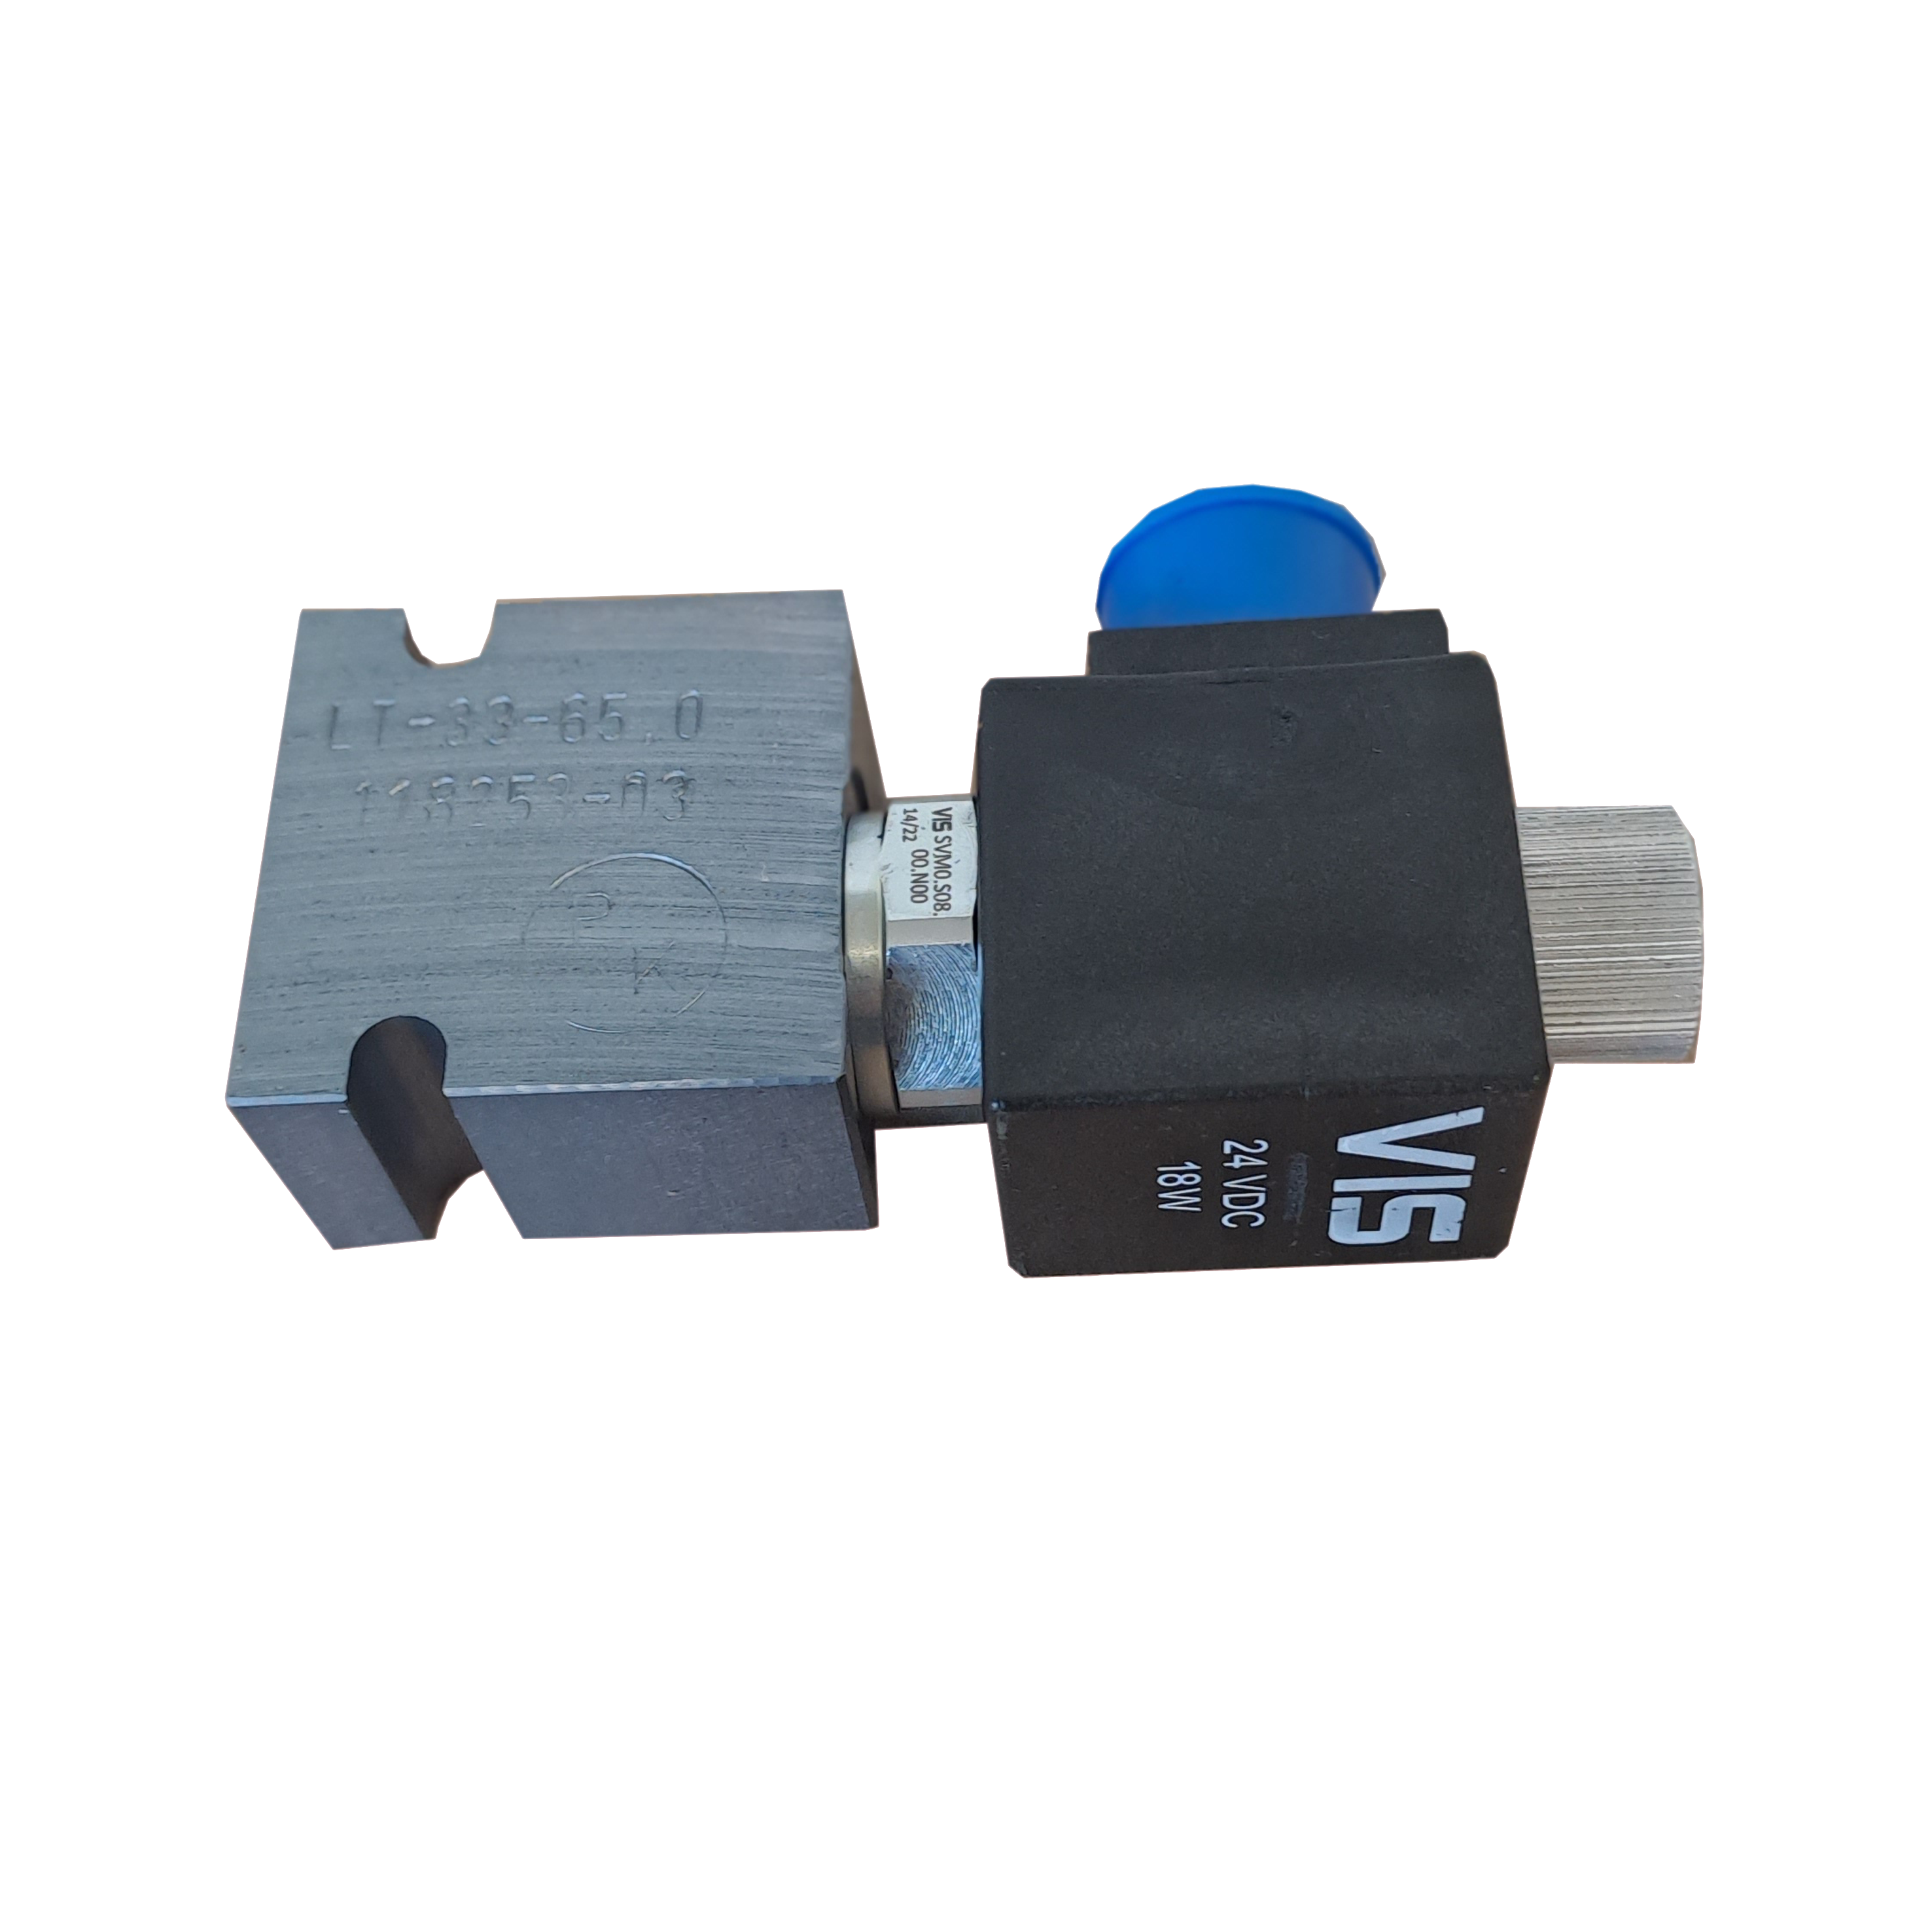 Cab Way Valve - Various Models (350MH / 200MH / 140W)